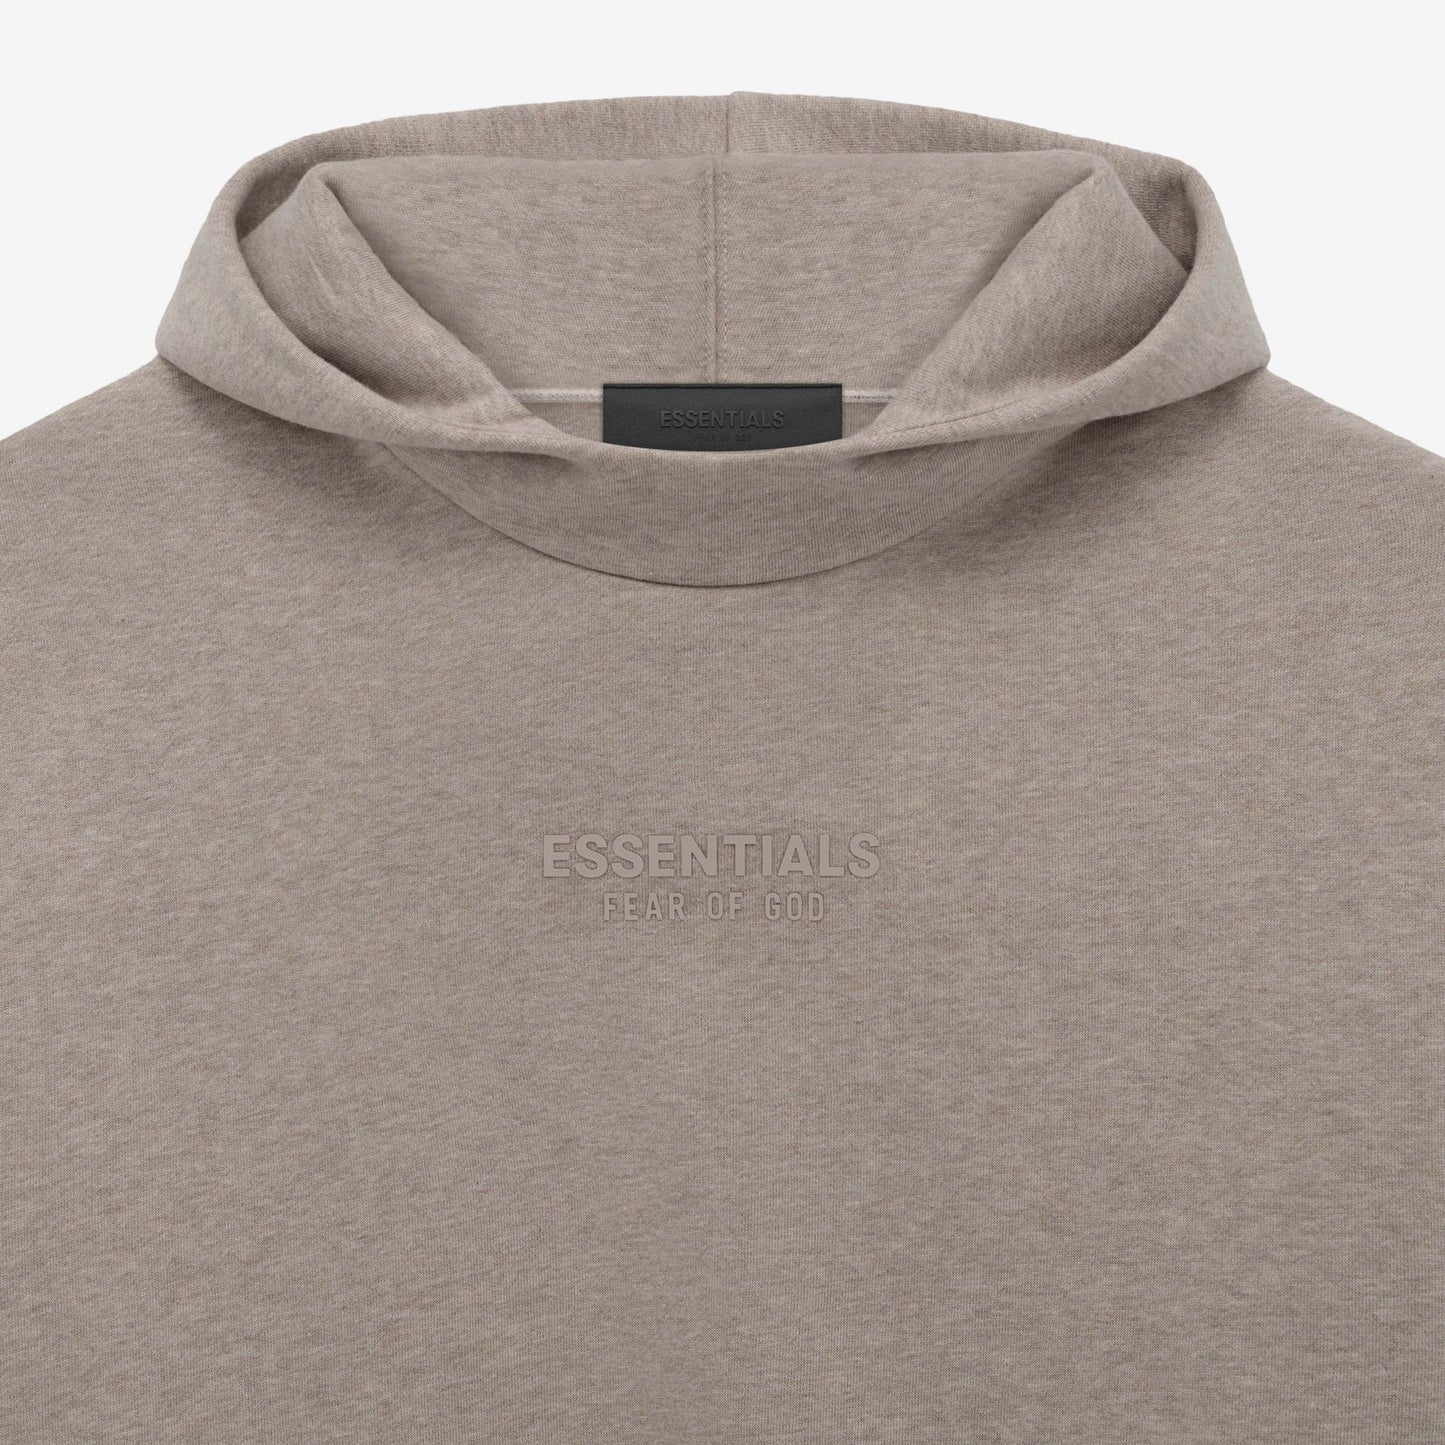 Fear of God Essentials Core Heather Hoodie Close View